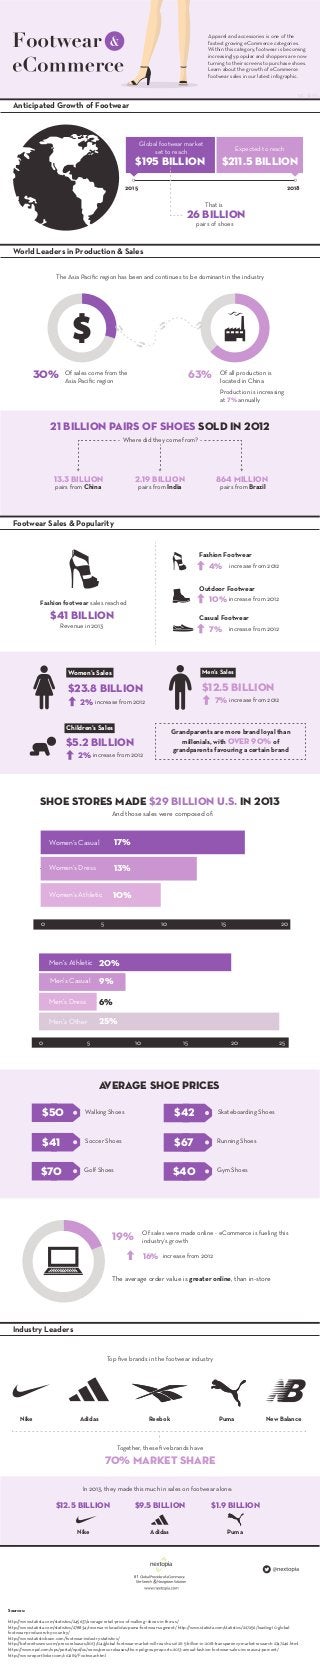 Apparel and accessories is one of the
fastest growing eCommerce categories.
Within this category, footwear is becoming
increasingly popular and shoppers are now
turning to their screens to purchase shoes.
Learn about the growth of eCommerce
footwear sales in our latest infographic.
Anticipated Growth of Footwear
2015 2018
Global footwear market
set to reach
$195 billion
Expected to reach
$211.5 billion
That is
26 billion
pairs of shoes
World Leaders in Production & Sales
The Asia Paciﬁc region has been and continues to be dominant in the industry
30% Of sales come from the
Asia Paciﬁc region
63% Of all production is
located in China
Production is increasing
at 7% annually
21 billion PAIRS OF SHOES SOLD IN 2012
Footwear Sales & Popularity
Fashion footwear sales reached
$41 BILLION
Revenue in 2013
Fashion Footwear
Outdoor Footwear
Casual Footwear
4% increase from 2012
10% increase from 2012
2% increase from 2012
7% increase from 2012
Women’s Sales
Children’s Sales
Men’s Sales
$23.8 billion
2% increase from 2012
$5.2 billion
7% increase from 2012
16% increase from 2012
$12.5 billion
Grandparents are more brand loyal than
millenials, with over 90% of
grandparents favouring a certain brand
Where did they come from?
pairs from China pairs from India pairs from Brazil
13.3 billion 2.19 billion 864 million
SHOE STORES MADE $29 BILLION U.S. IN 2013
0 5 10 15 20
Women’s Casual
Women’s Dress
Women’s Athletic
17%
13%
10%
0 5 10 15 20 25
Men’s Athletic
Men’s Casual
Men’s Dress
Men’s Other
20%
9%
6%
25%
19% Of sales were made online - eCommerce is fueling this
industry’s growth
The average order value is greater online, than in-store
Average Shoe Prices
$50
$41
$70
$42
$67
$40
Walking Shoes
Soccer Shoes
Golf Shoes
Skateboarding Shoes
Running Shoes
Gym Shoes
Industry Leaders
And those sales were composed of:
Top ﬁve brands in the footwear industry
Nike Adidas Reebok Puma New Balance
Together, these ﬁve brands have
70% market share
Nike Adidas Puma
$12.5 billion $9.5 billion $1.9 billion
In 2013, they made this much in sales on footwear alone:
Sources:
http://www.statista.com/statistics/245637/average-retail-price-of-walking--shoes-in-the-us/
http://www.statista.com/statistics/278834/revenue-nike-adidas-puma-footwear-segment/ http://www.statista.com/statistics/227256/leading-10-global-
footwear-producers-by-country/
http://www.statisticbrain.com/footwear-industry-statistics/
http://beforeitsnews.com/press-releases/2013/04/global-footwear-market-will-reach-usd-211-5-billion-in-2018-transparency-market-research-2747246.html
https://www.npd.com/wps/portal/npd/us/news/press-releases/the-npd-group-reports-2013-annual-fashion-footwear-sales-increase-4-percent/
http://www.reportlinker.com/ci02119/Footwear.html
st. & eb.
 